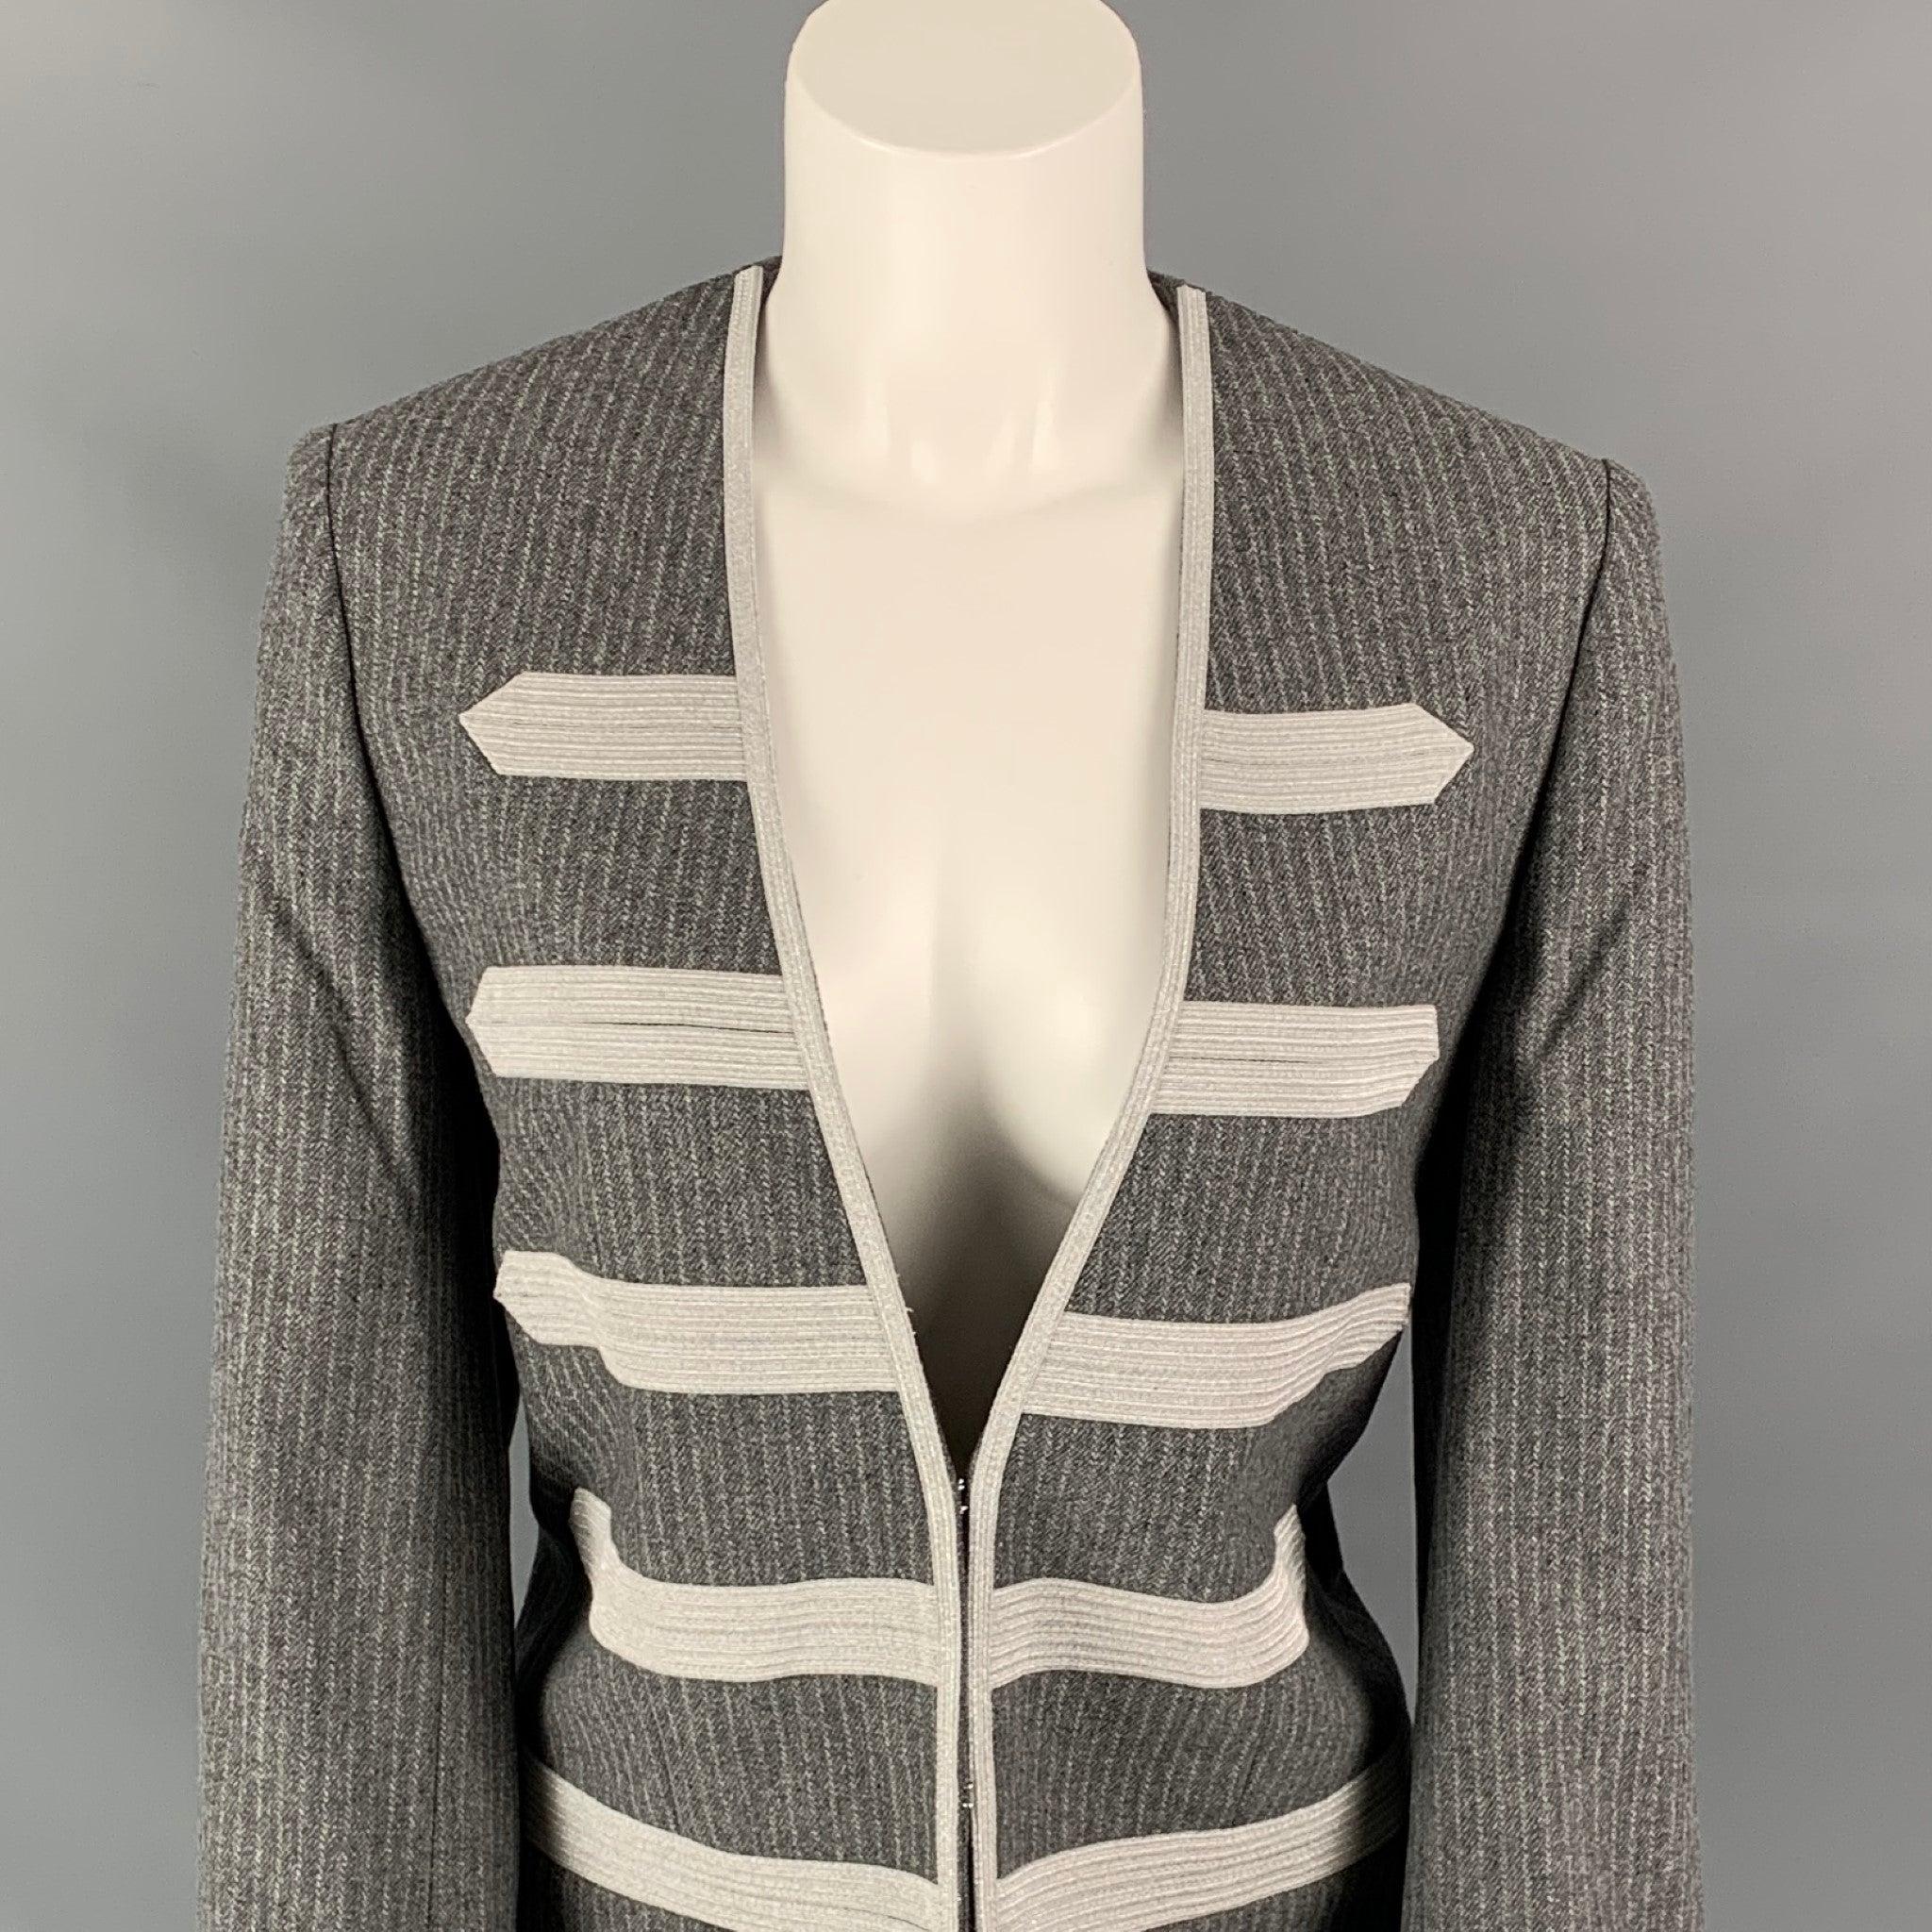 ZADIG & VOLTAIRE coat comes in a grey & silver pinstripe wool blend with a full liner featuring a military style, collarless, and a hook & loop closure.
New With Tags.
 

Marked:  40 

Measurements: 
 
Shoulder:
15.5 inches Bust: 38 inches Sleeve: